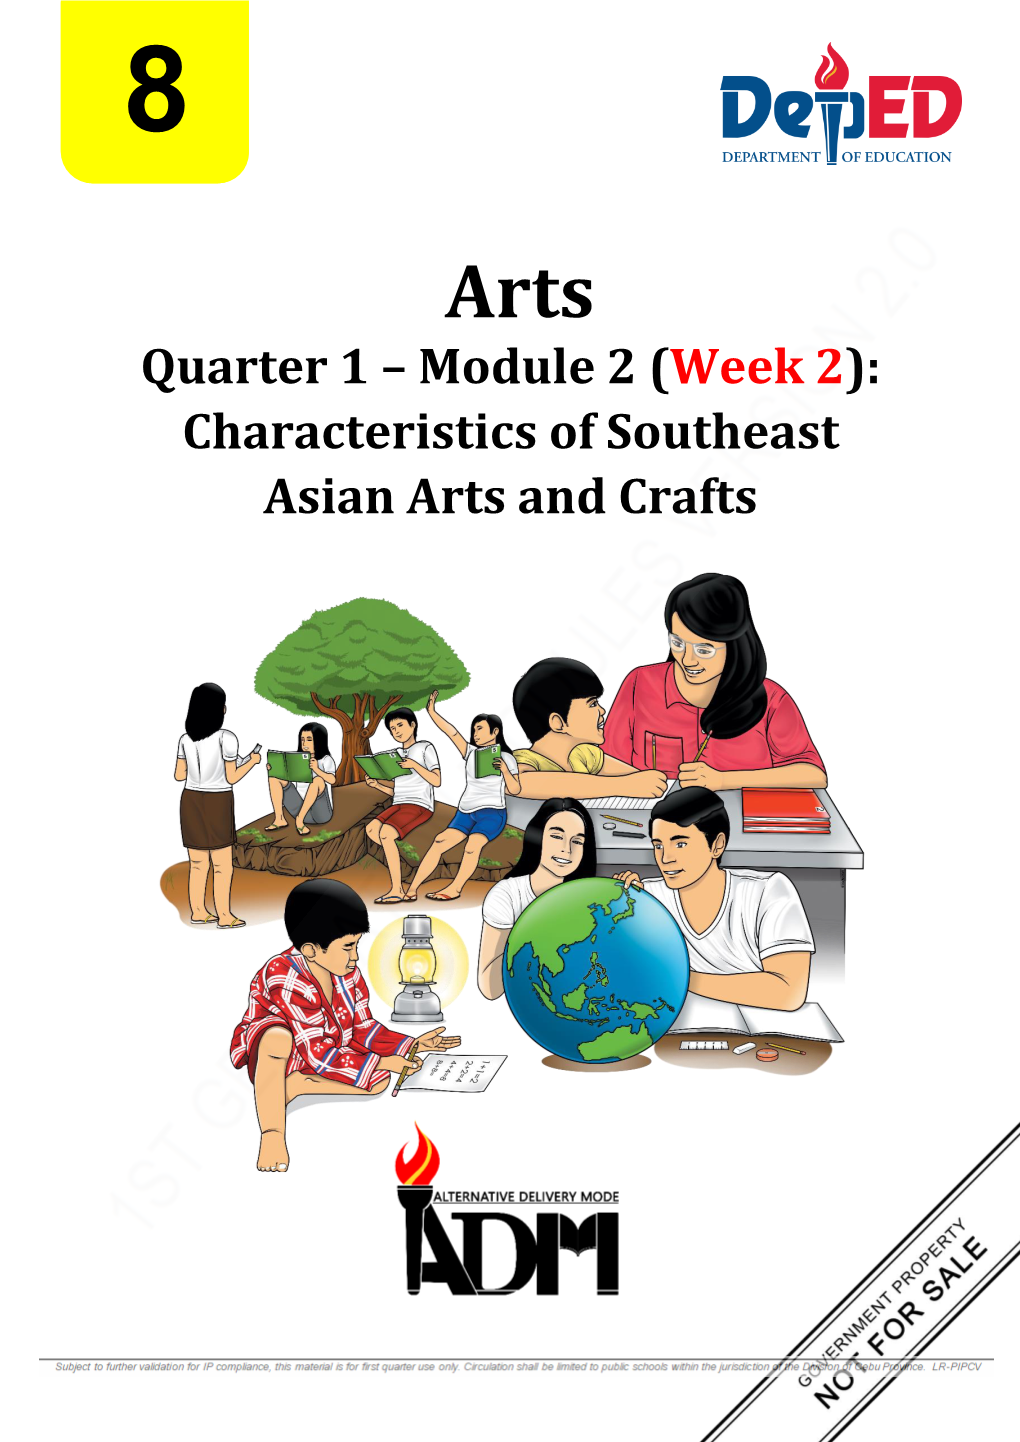 Module 2 (Week 2): Characteristics of Southeast Asian Arts and Crafts